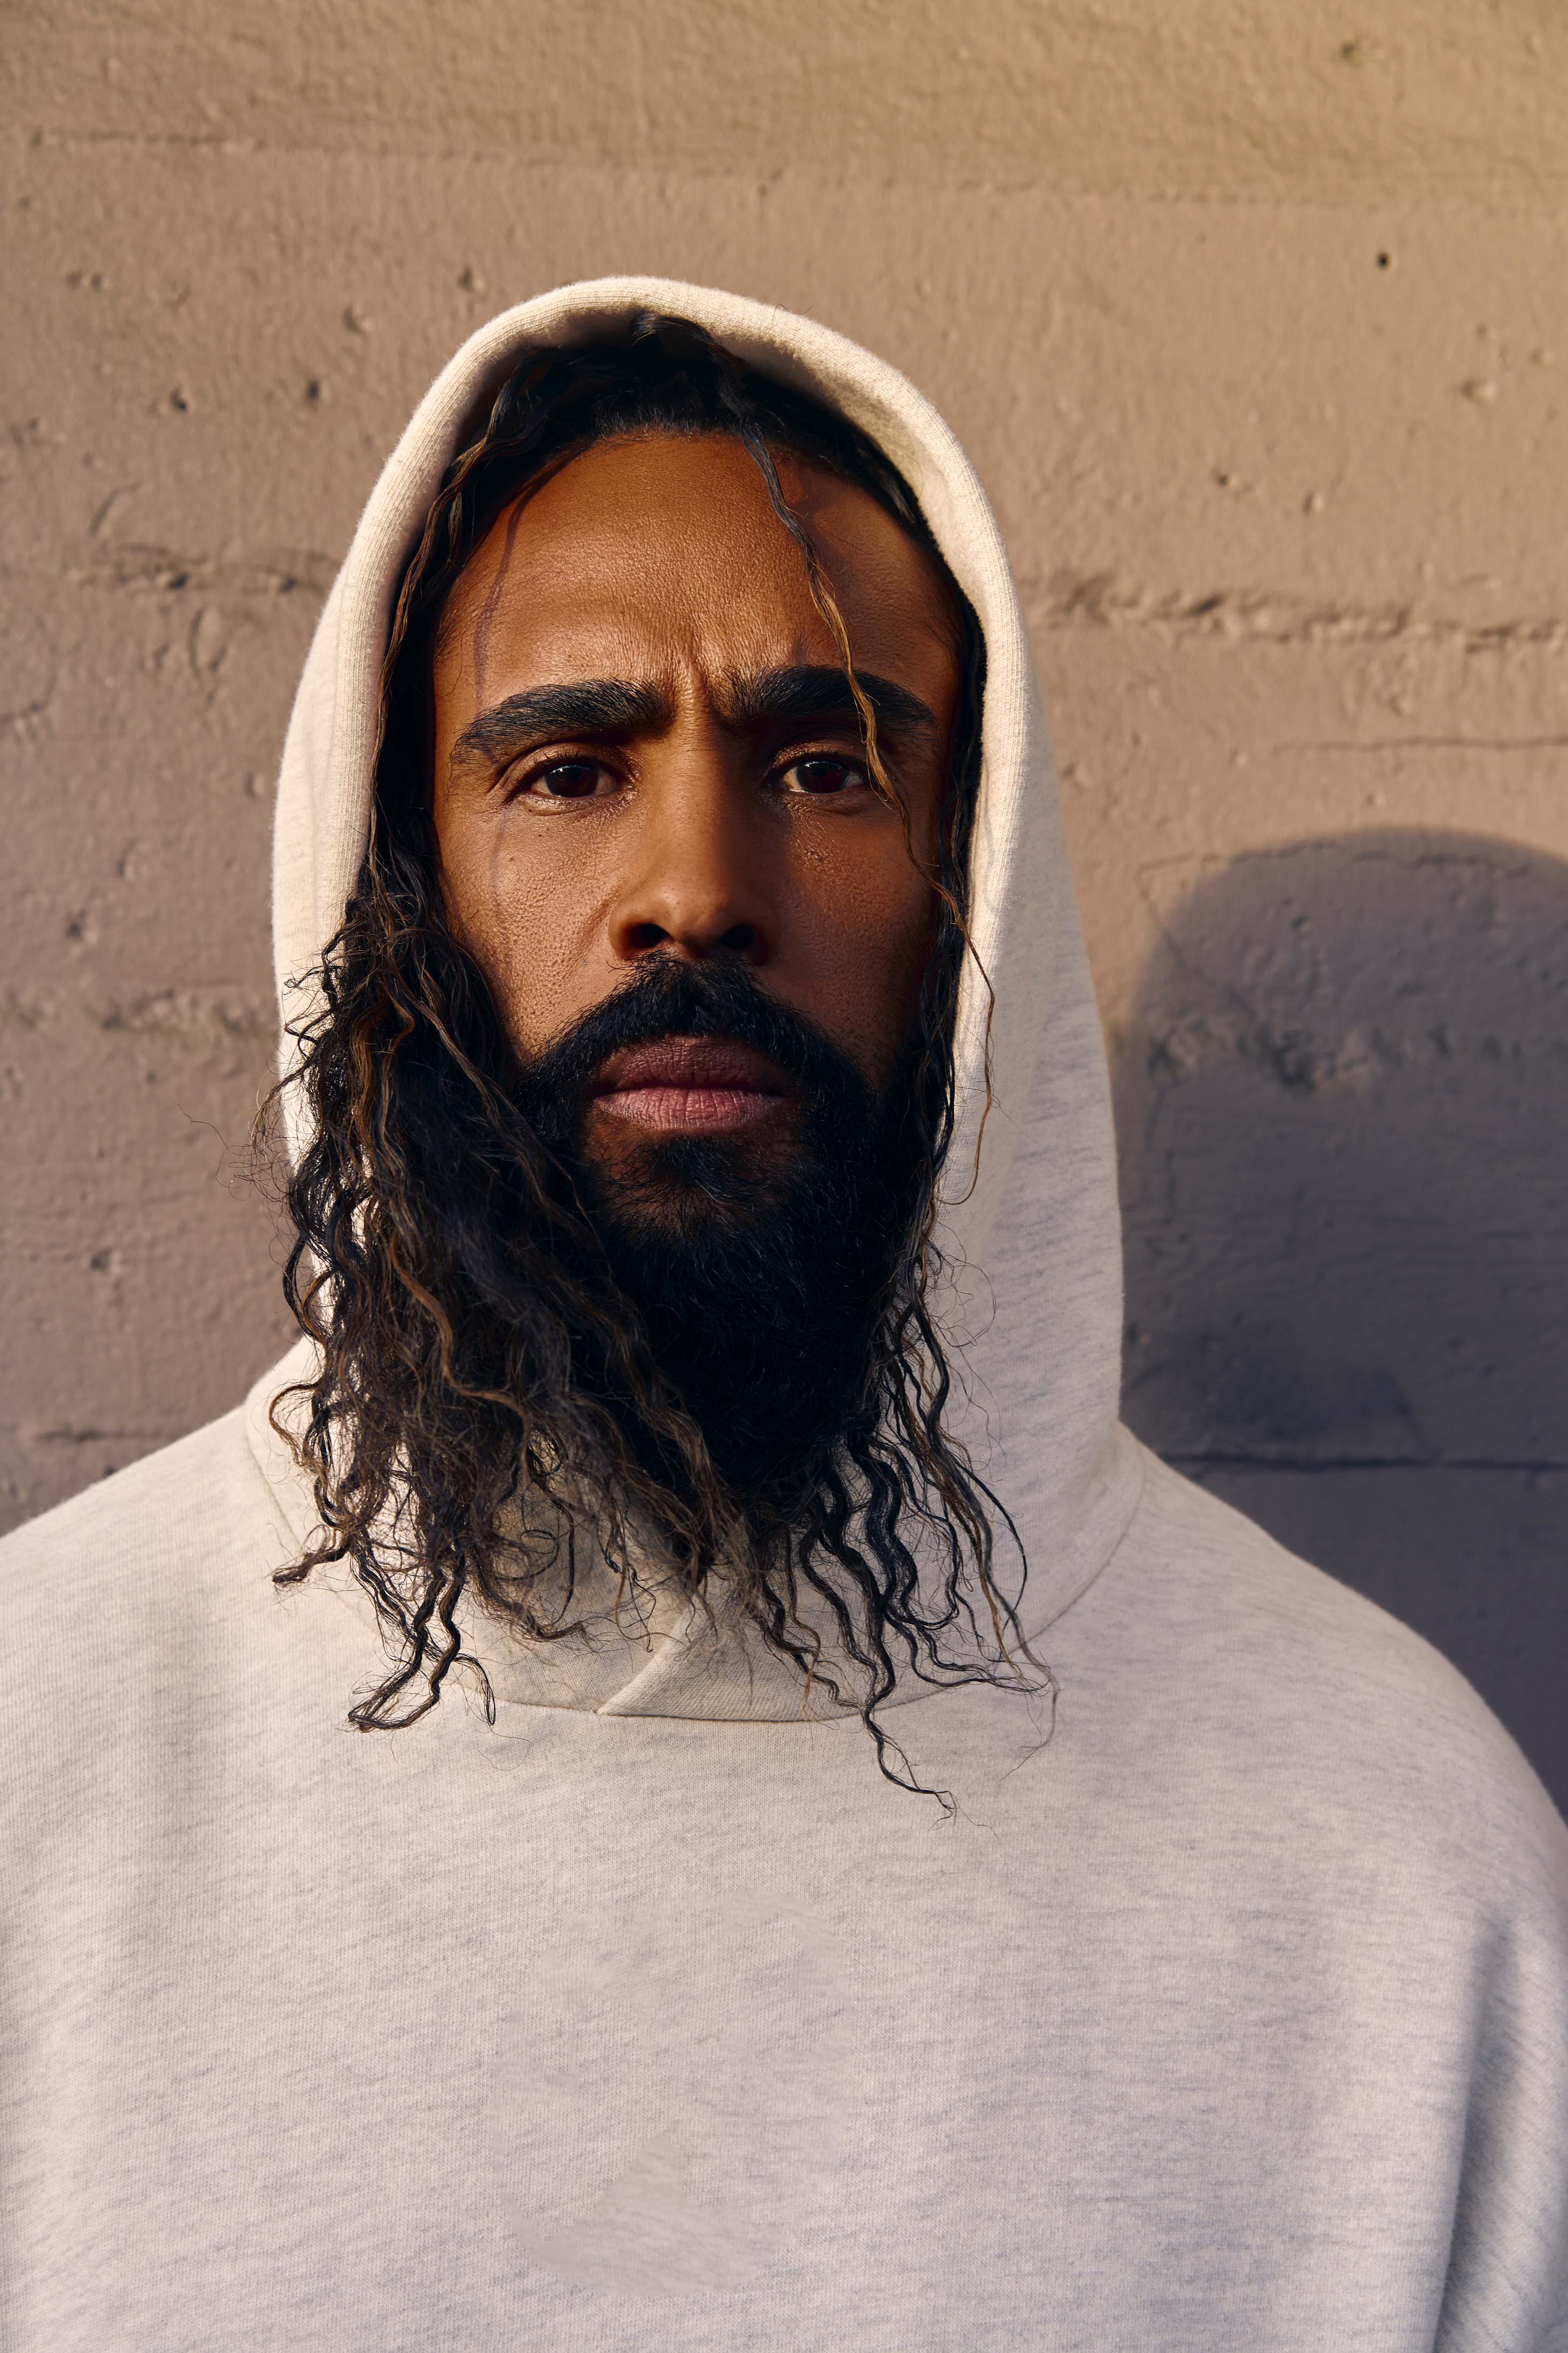 Jerry Lorenzo Archives - HotNewHipHop